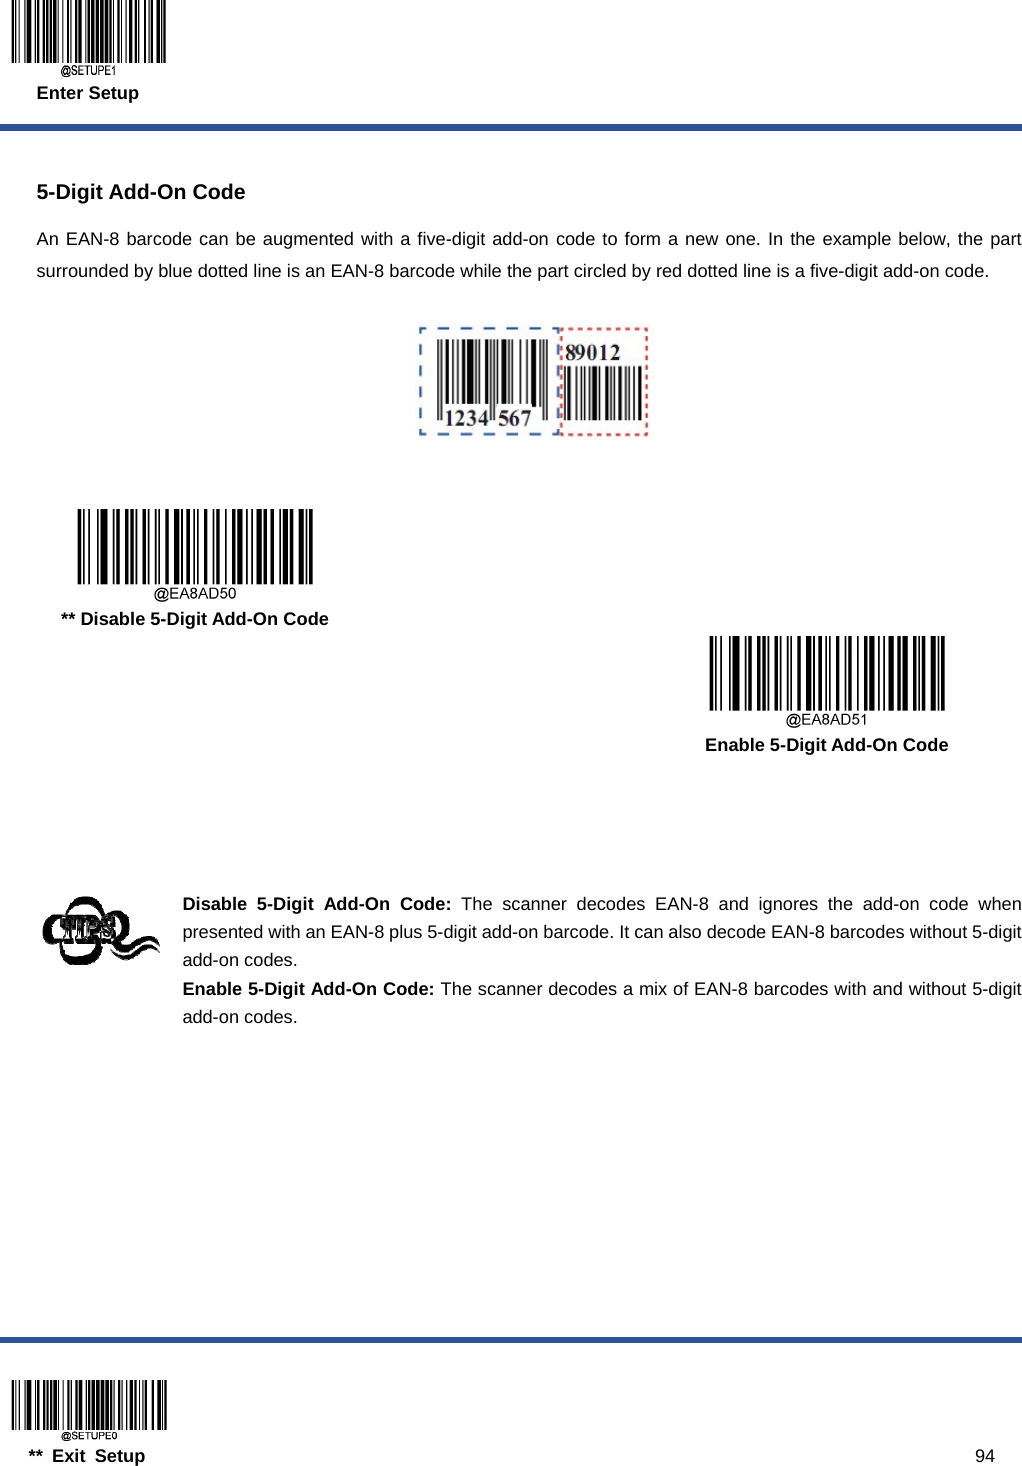  Enter Setup  ** Exit Setup                                                                                           94  5-Digit Add-On Code An EAN-8 barcode can be augmented with a five-digit add-on code to form a new one. In the example below, the part surrounded by blue dotted line is an EAN-8 barcode while the part circled by red dotted line is a five-digit add-on code.        ** Disable 5-Digit Add-On Code      Enable 5-Digit Add-On Code     Disable 5-Digit Add-On Code: The scanner decodes EAN-8 and ignores the add-on code when presented with an EAN-8 plus 5-digit add-on barcode. It can also decode EAN-8 barcodes without 5-digit add-on codes. Enable 5-Digit Add-On Code: The scanner decodes a mix of EAN-8 barcodes with and without 5-digit add-on codes.  